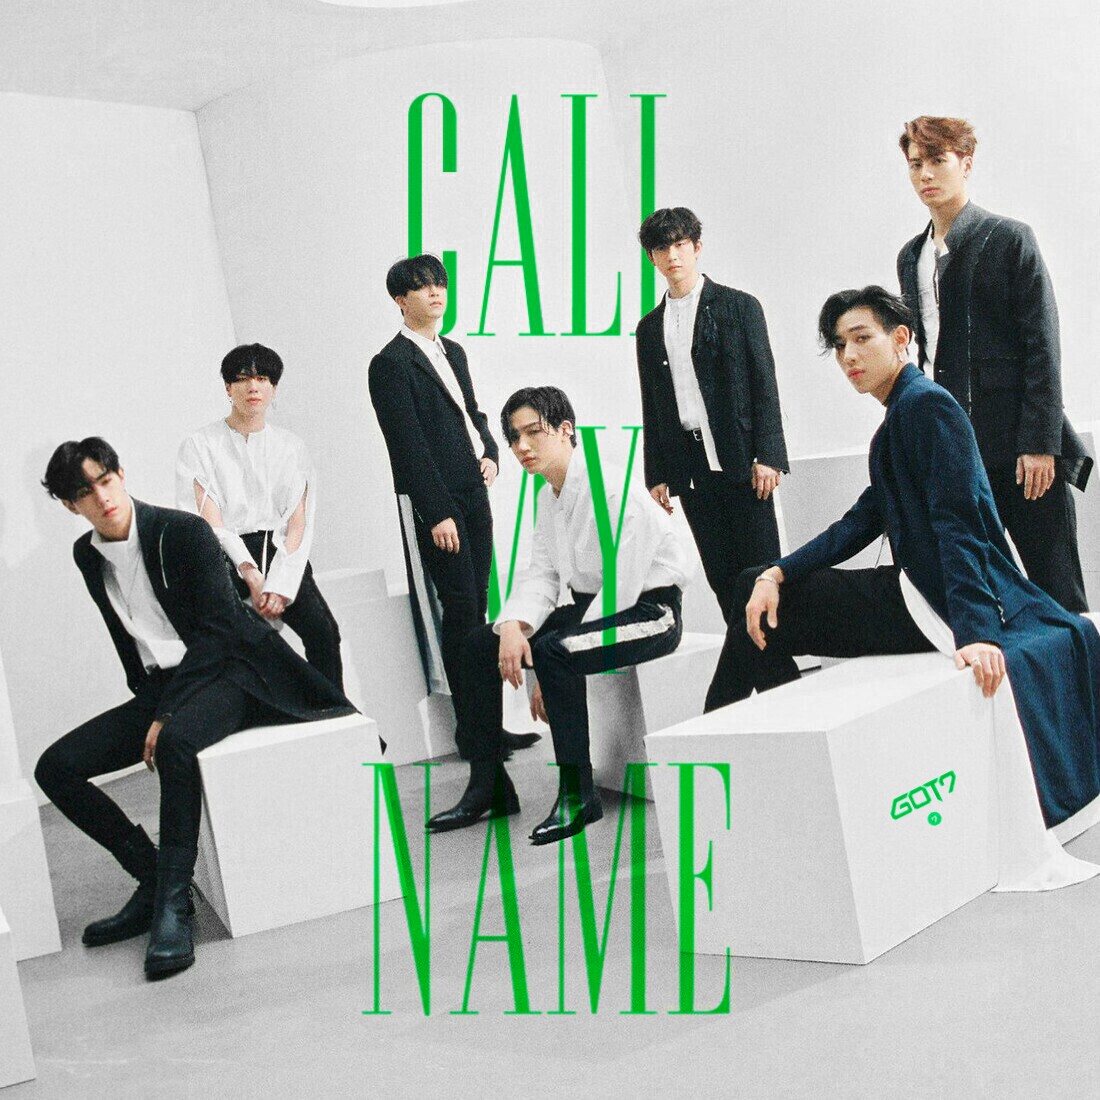 GOT7 - Call My Name (The 10th Mini Album) by PlatinumCovers on DeviantArt